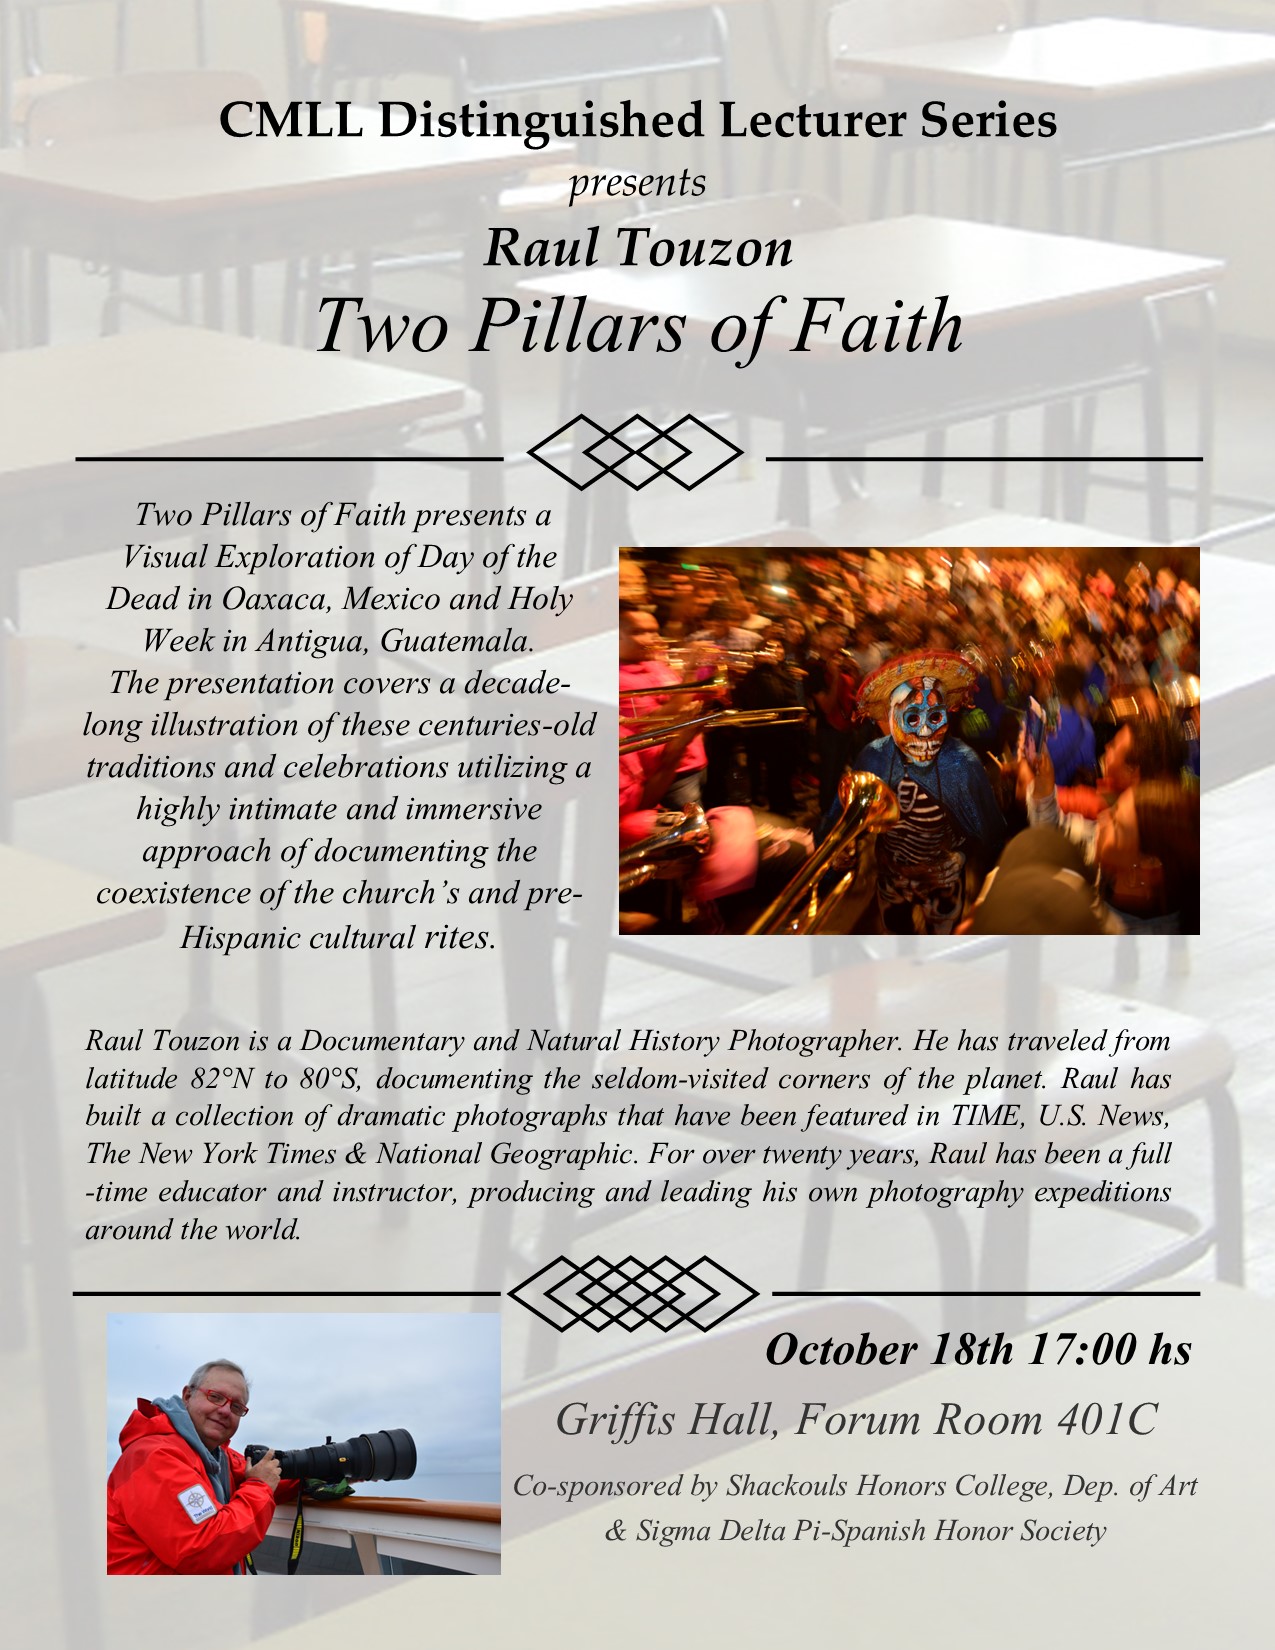 Image of Raul Touzon Lecture: Two Pillars of Faith